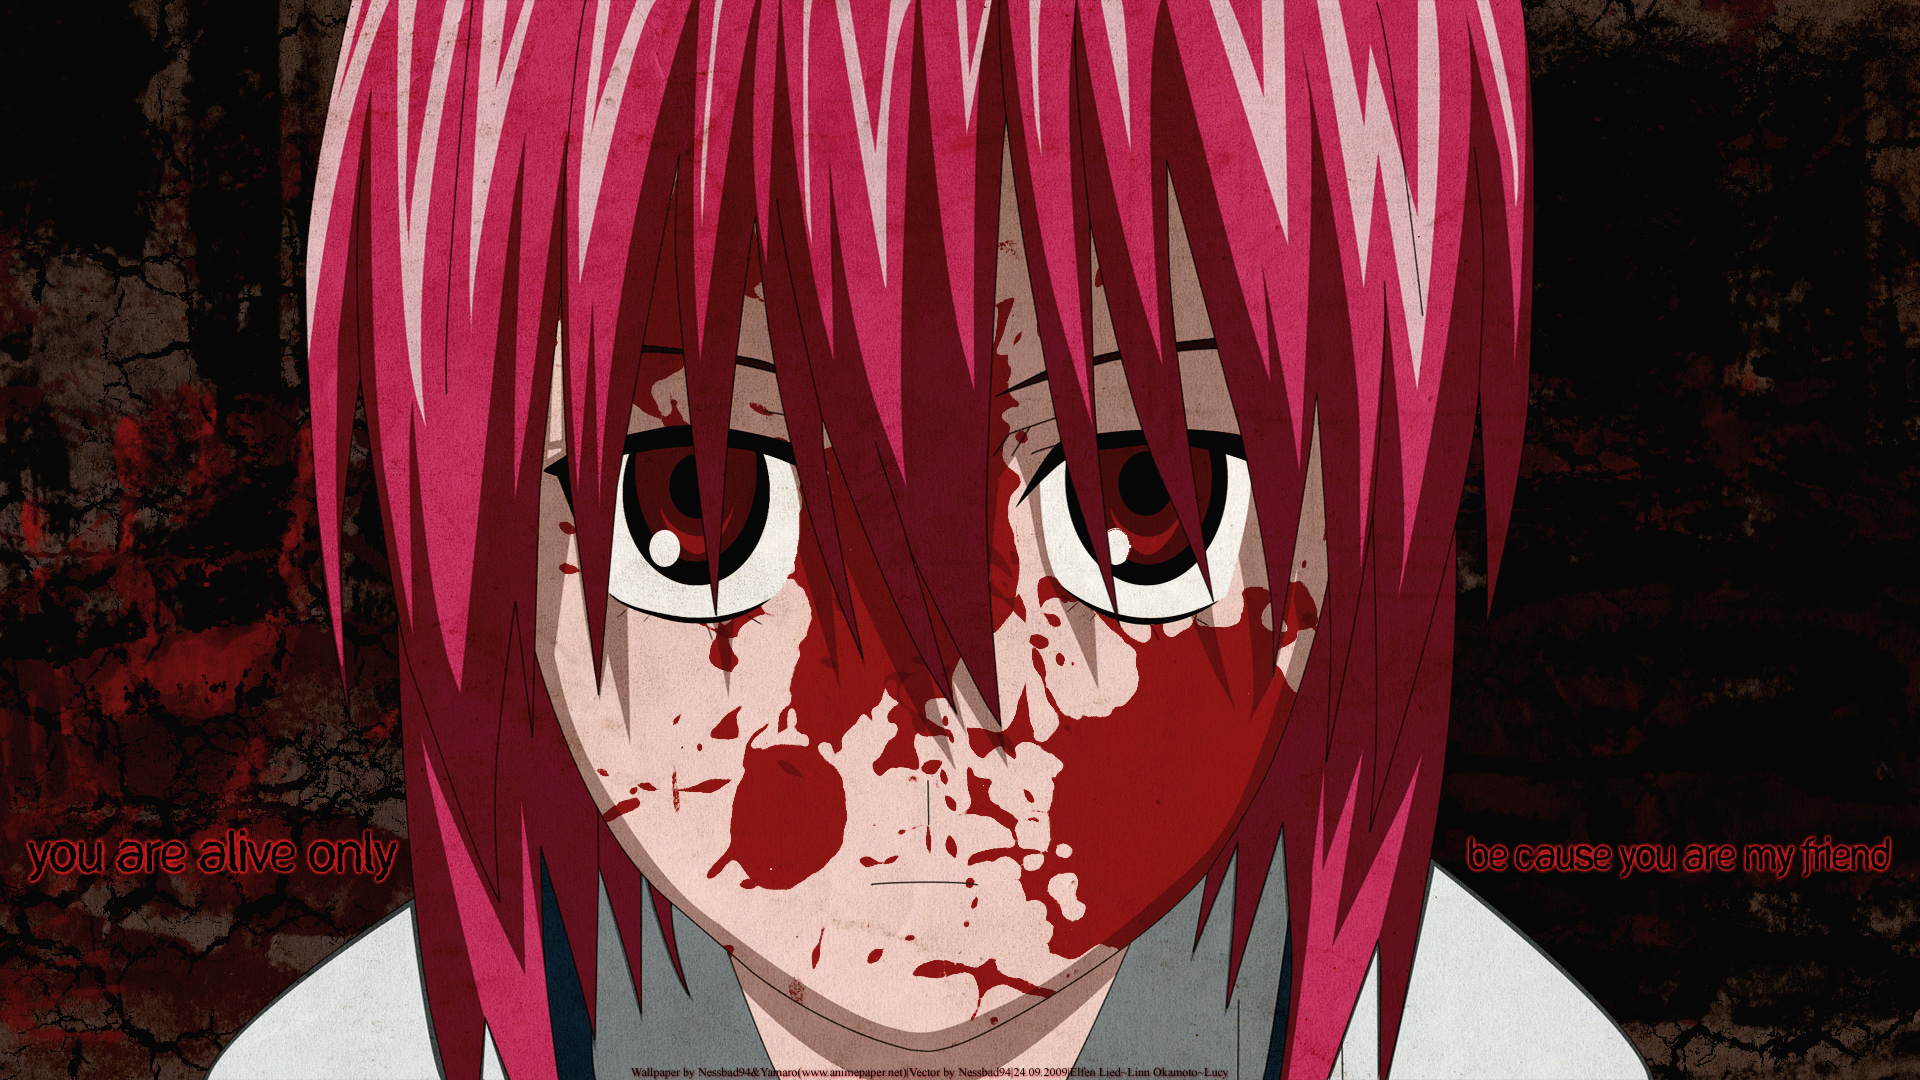 Lucy from Elfen Lied, a captivating anime character with an intense gaze.